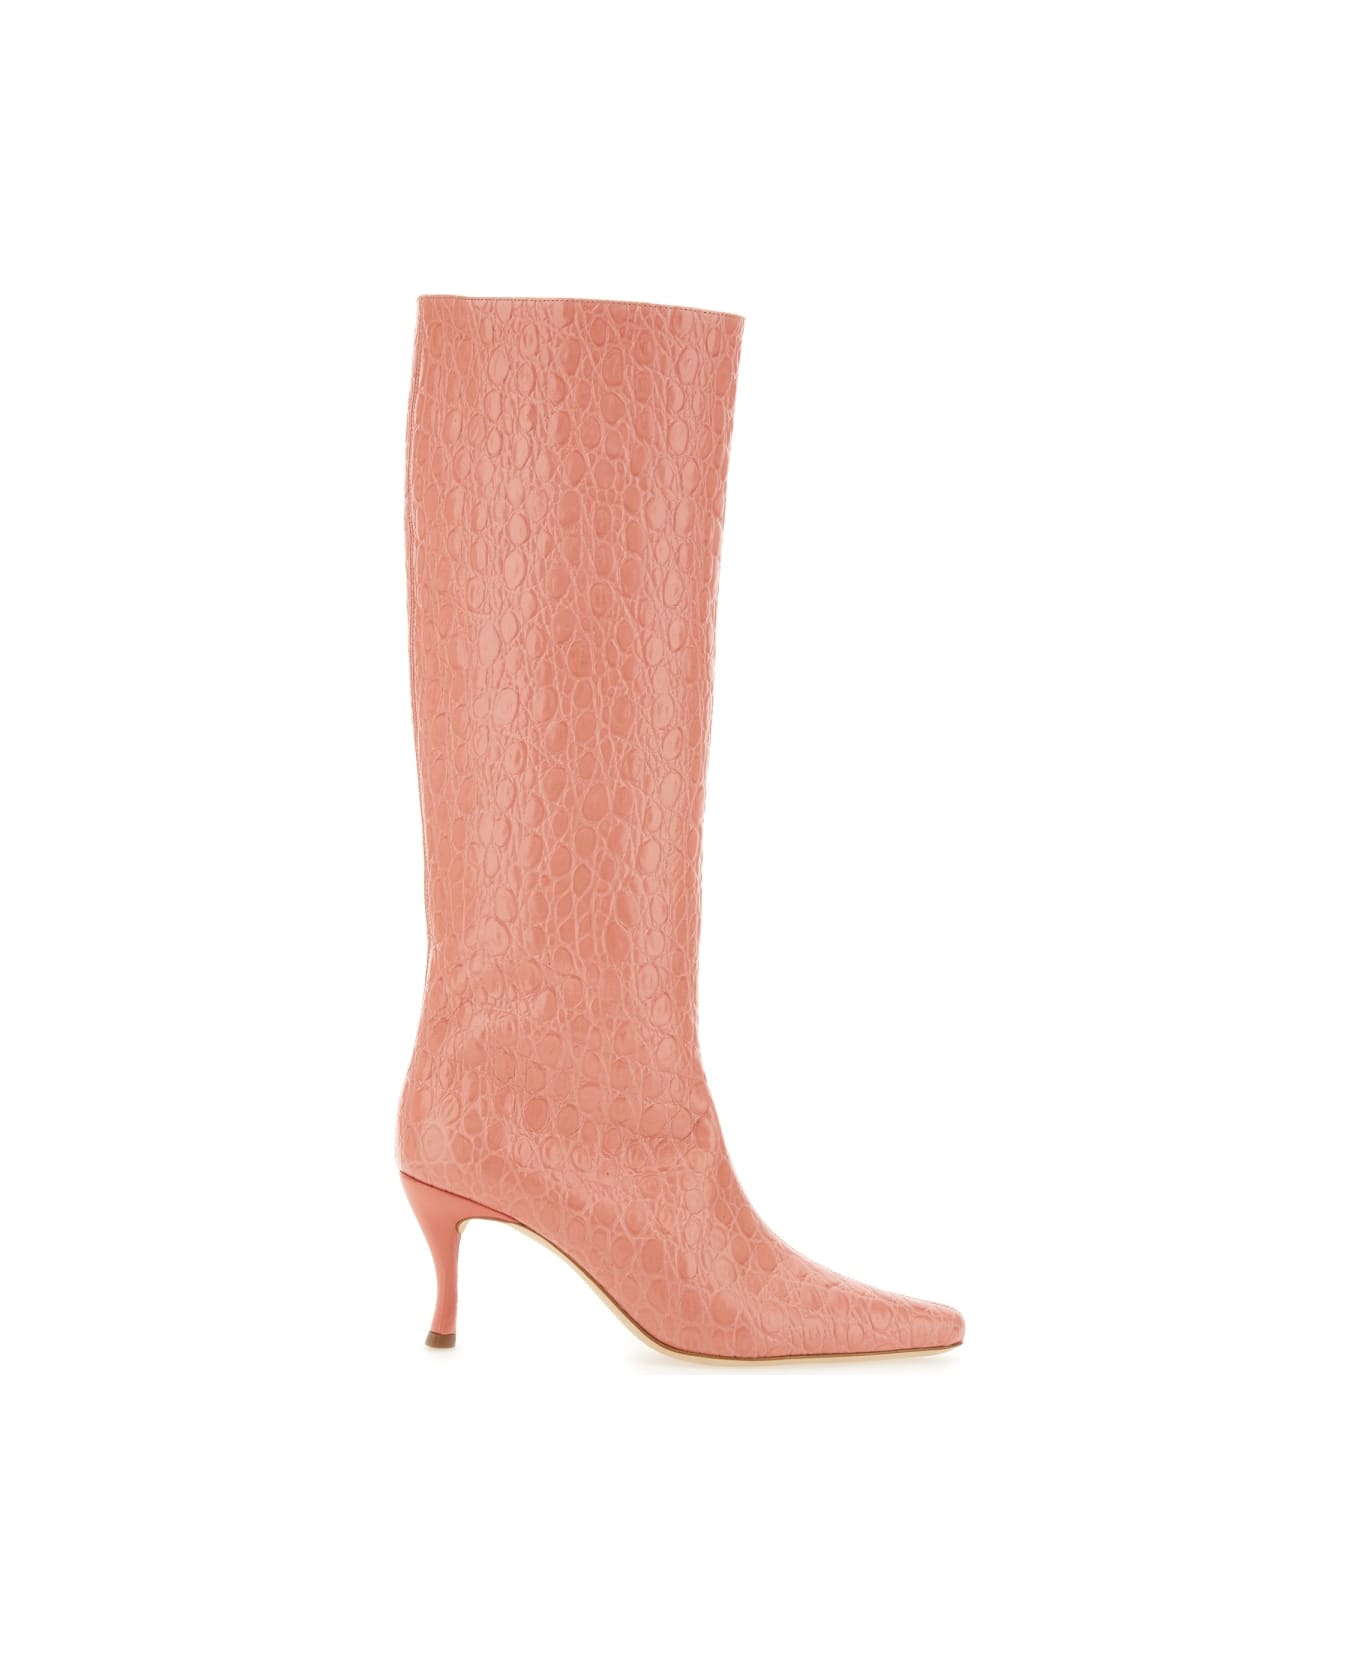 BY FAR Stevie Boot - PINK